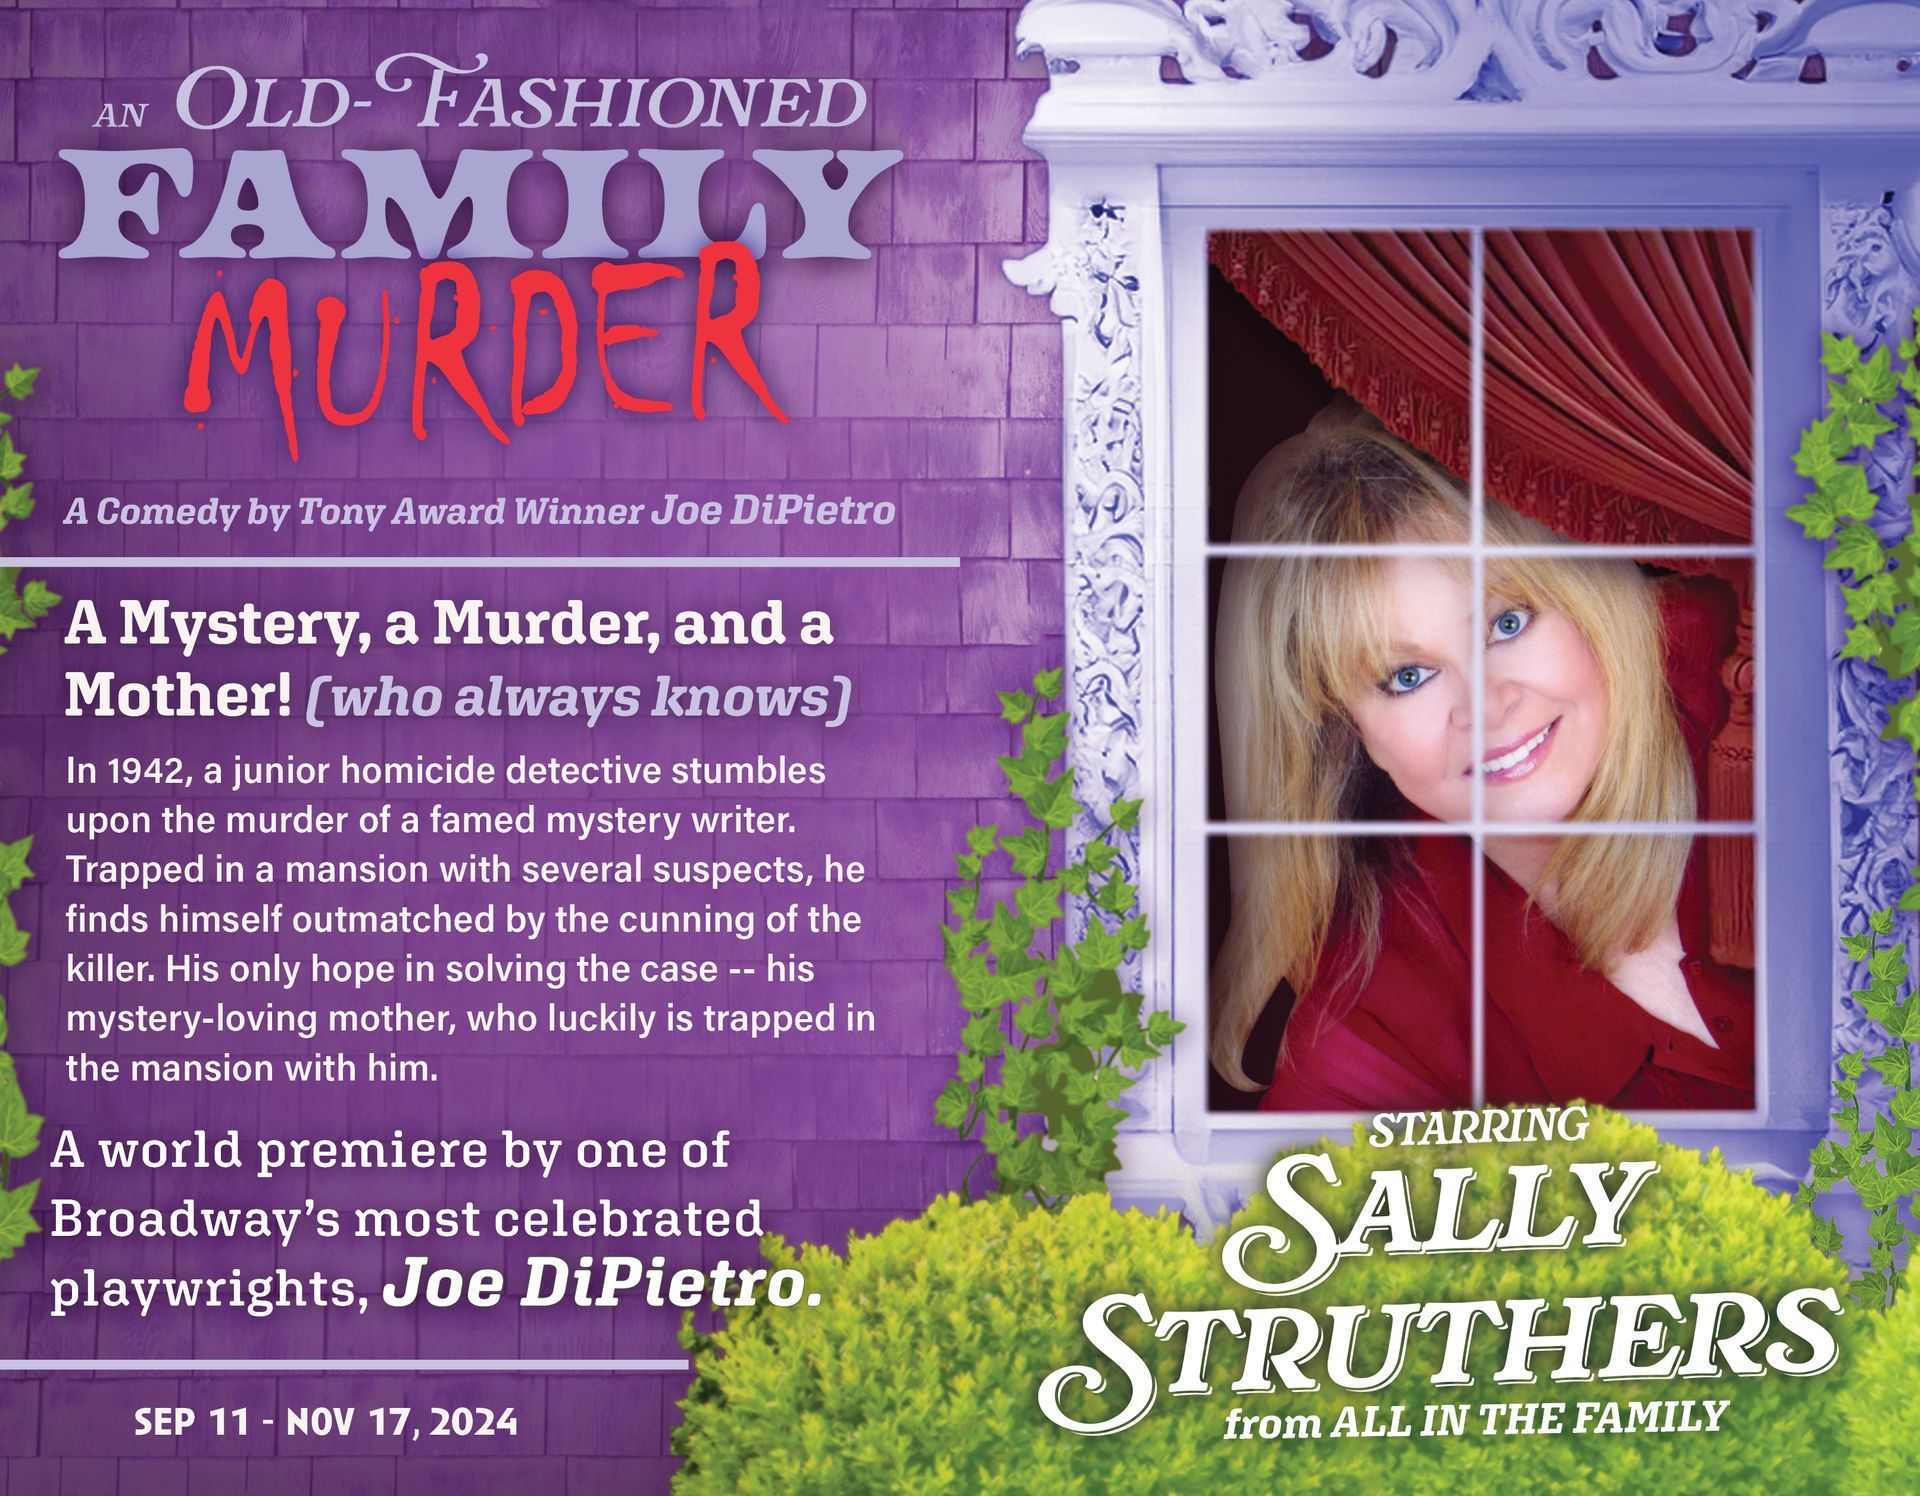 sally struthers starring in an old fashioned family murder. a comedy by tony award winner joe dipietro. a mystery, a murder, and a mother who always knows...
In 1942, a junior homicide detective stumbles upon the murder of a famed mystery writer. Trapped in a mansion with several suspects, he finds himself outmatched by the cunning of the killer. His only hope in solving the case -- his mystery-loving mother, who luckily is trapped in the mansion with him. 
A world premiere by one of Broadway’s most celebrated playwrights, Joe DiPietro.
september 11th to november 17th 2024